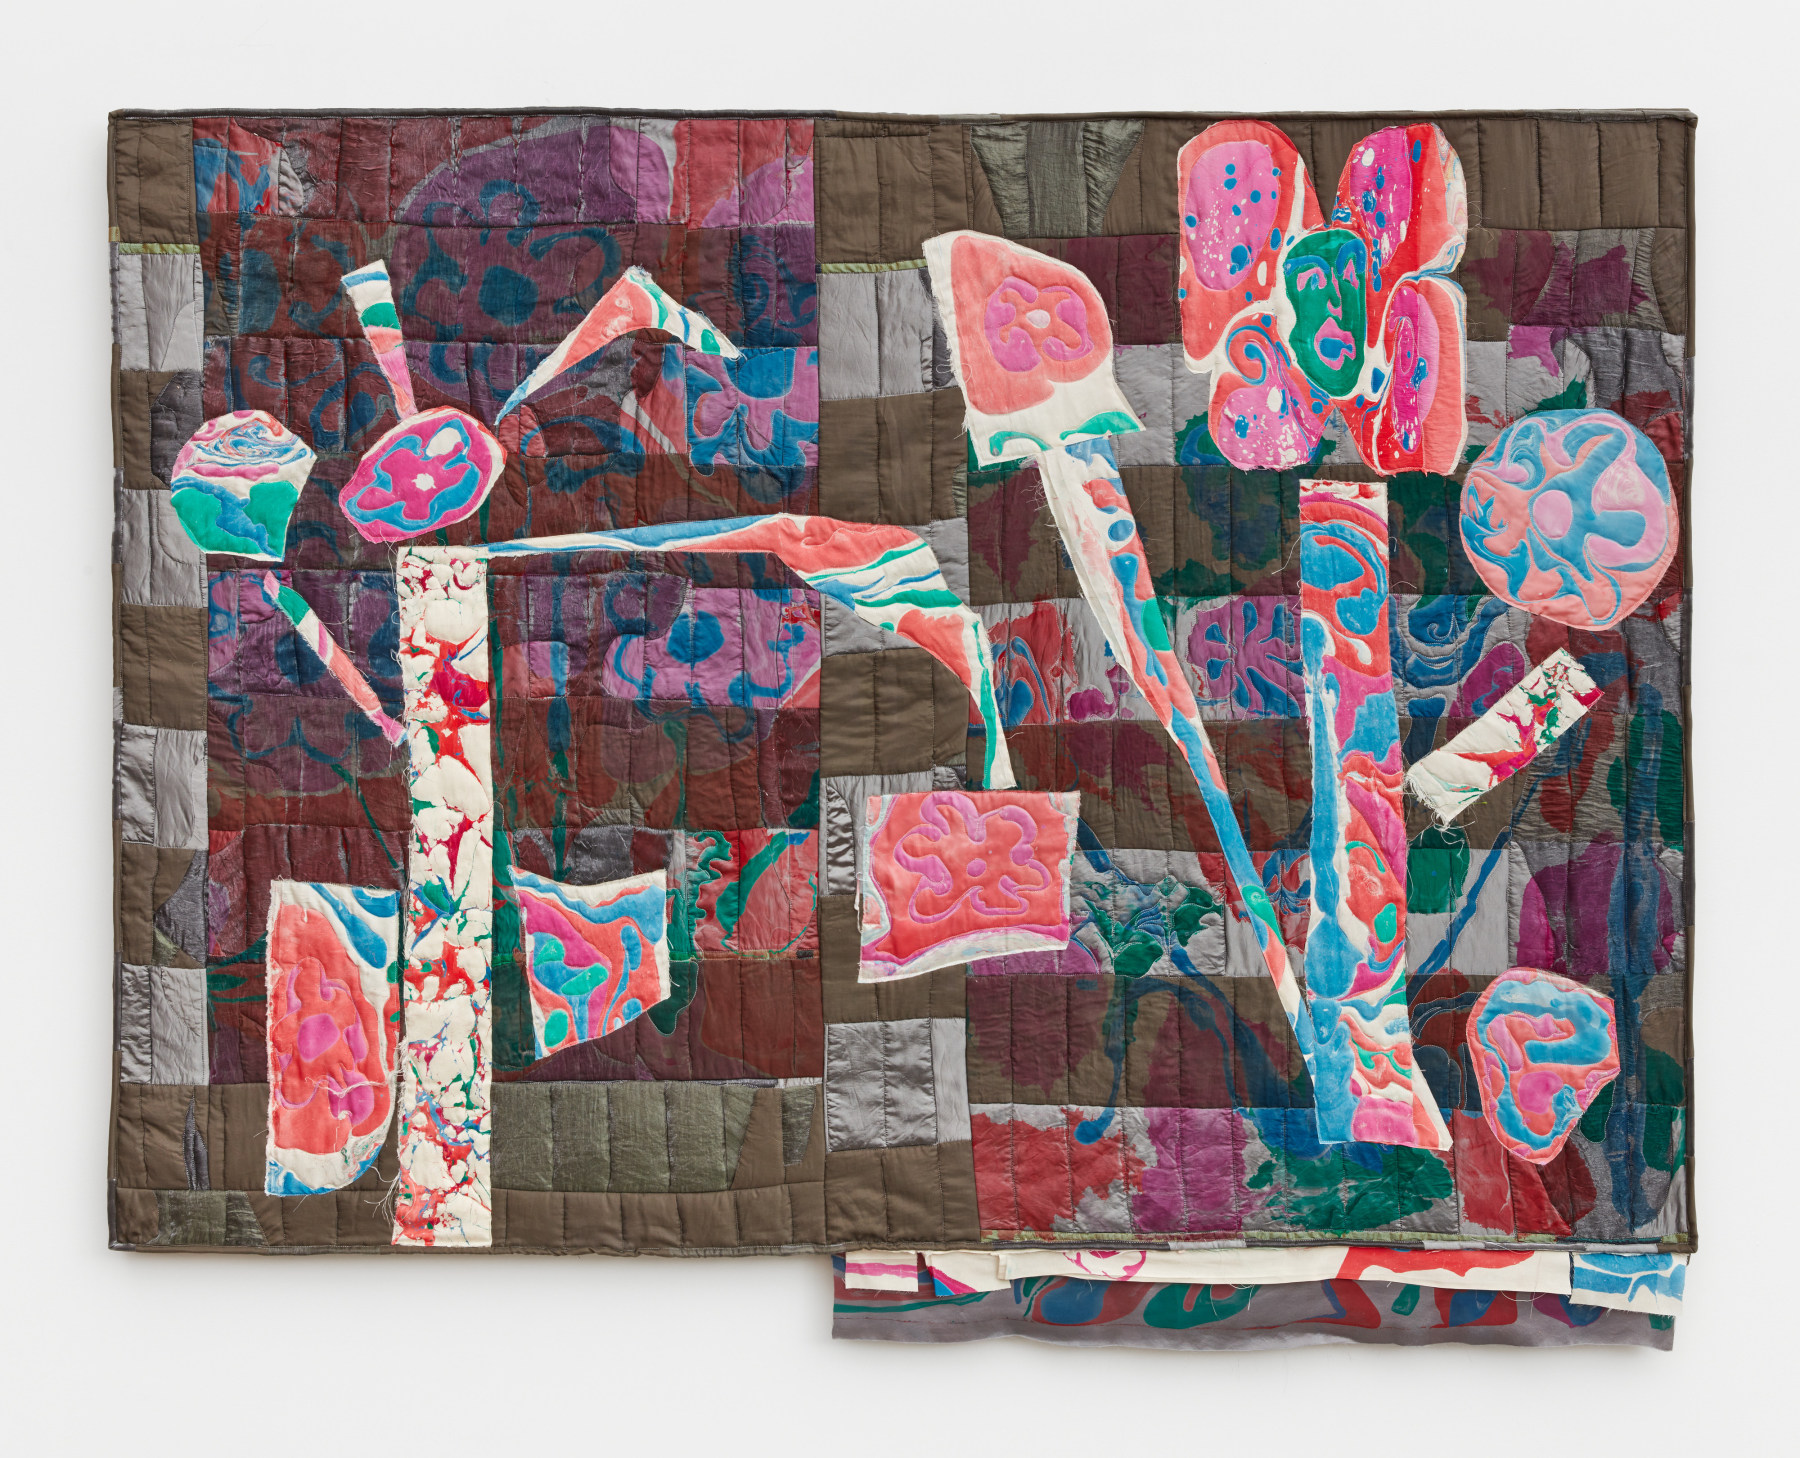 Libby Rosen's artwork "Flower Boss". Bright pink and blue swatches of fabric resembling flowers on a grey and brown background. 52 x 66 1/2 in (132.1 x 168.9 cm), acrylic, satin and batting, 2022